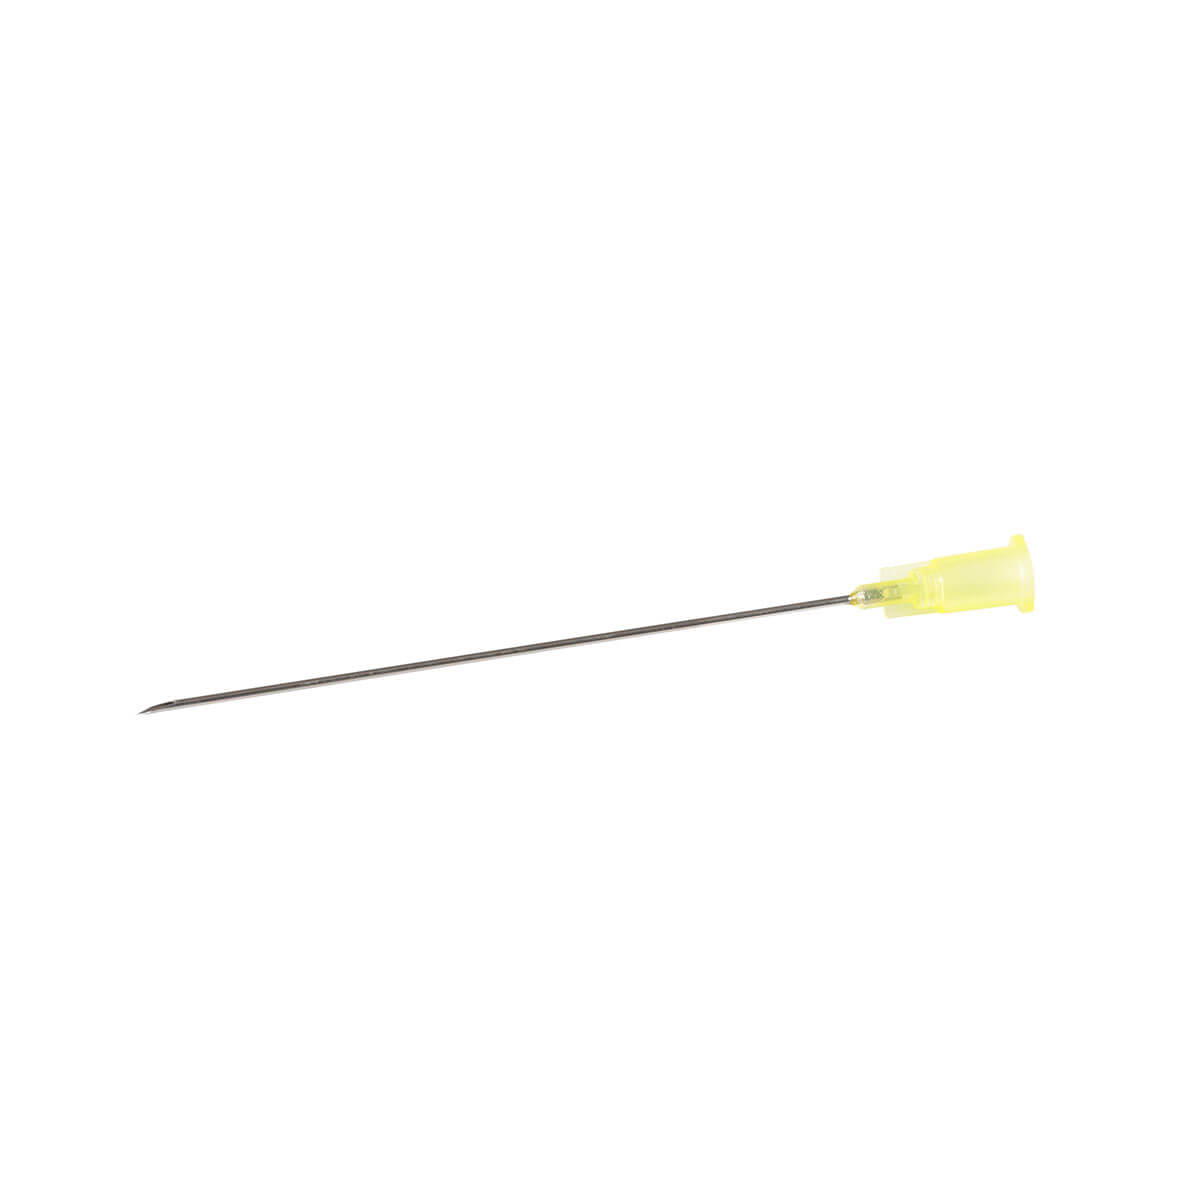 Sterican Needle Yellow 20G 70MM